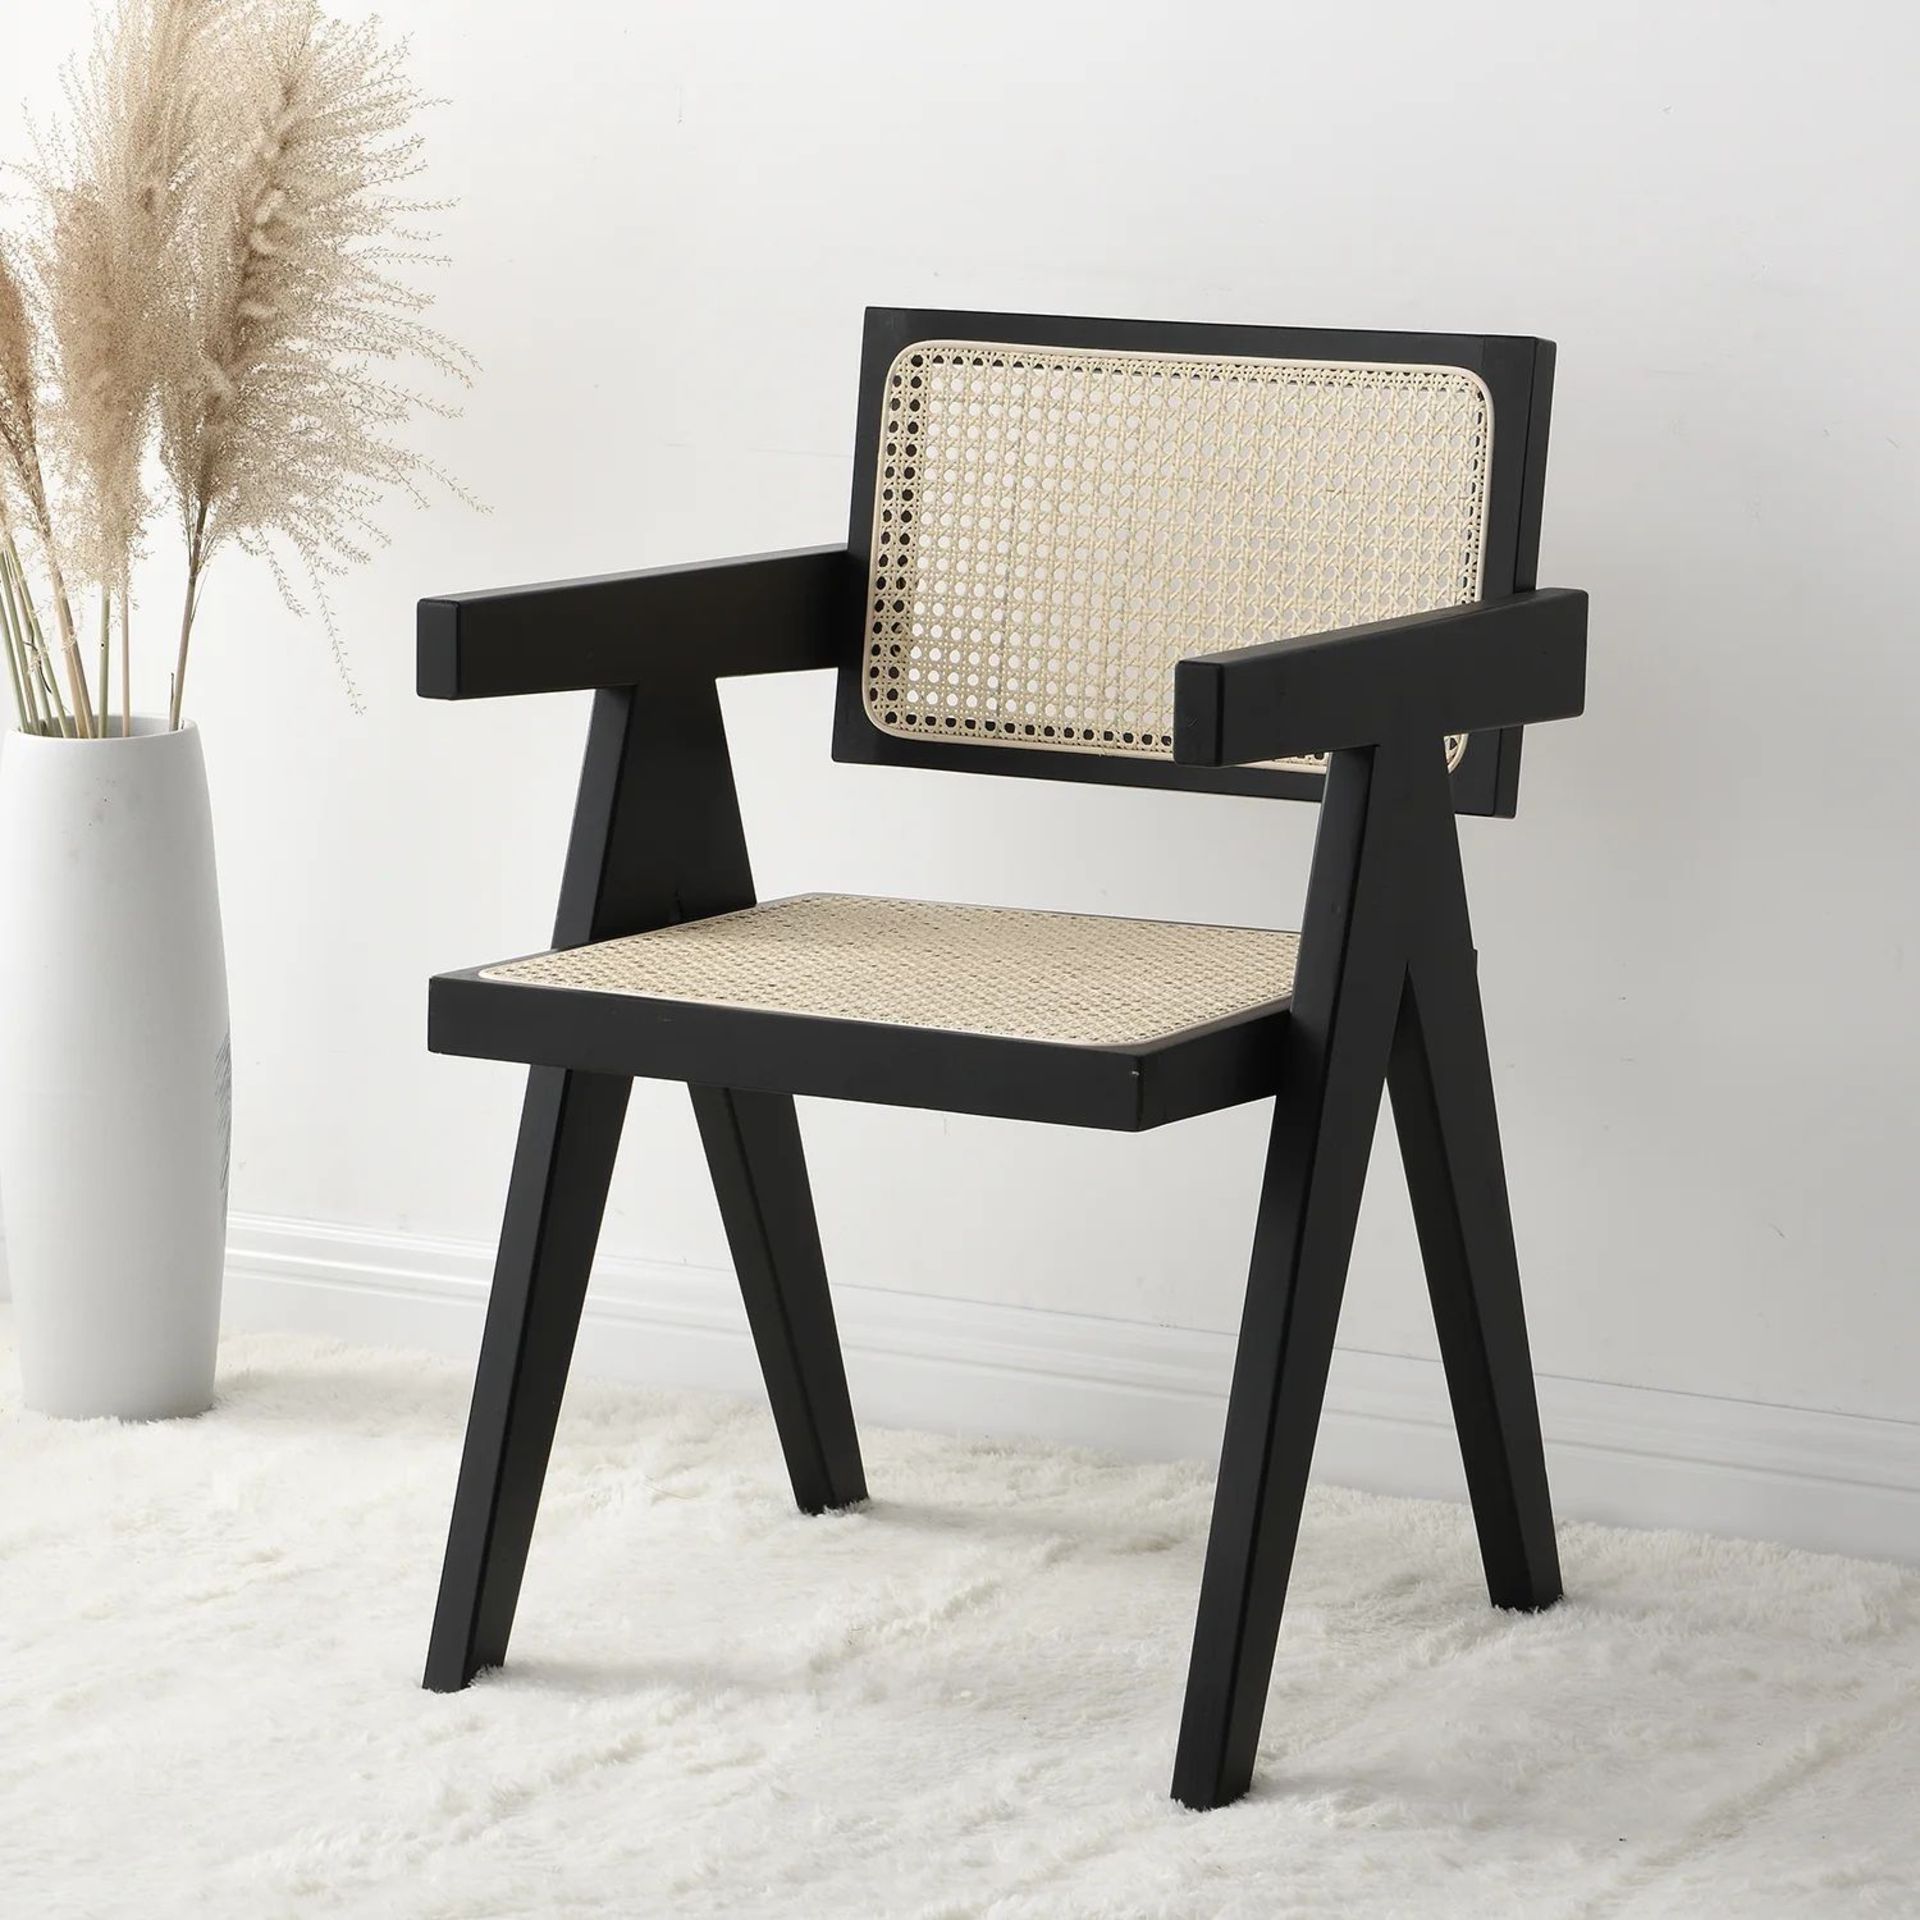 Jeanne Black Colour Cane Rattan Solid Beech Wood Dining Chair. - R19.2. RRP £219.99. The cane rattan - Image 3 of 4